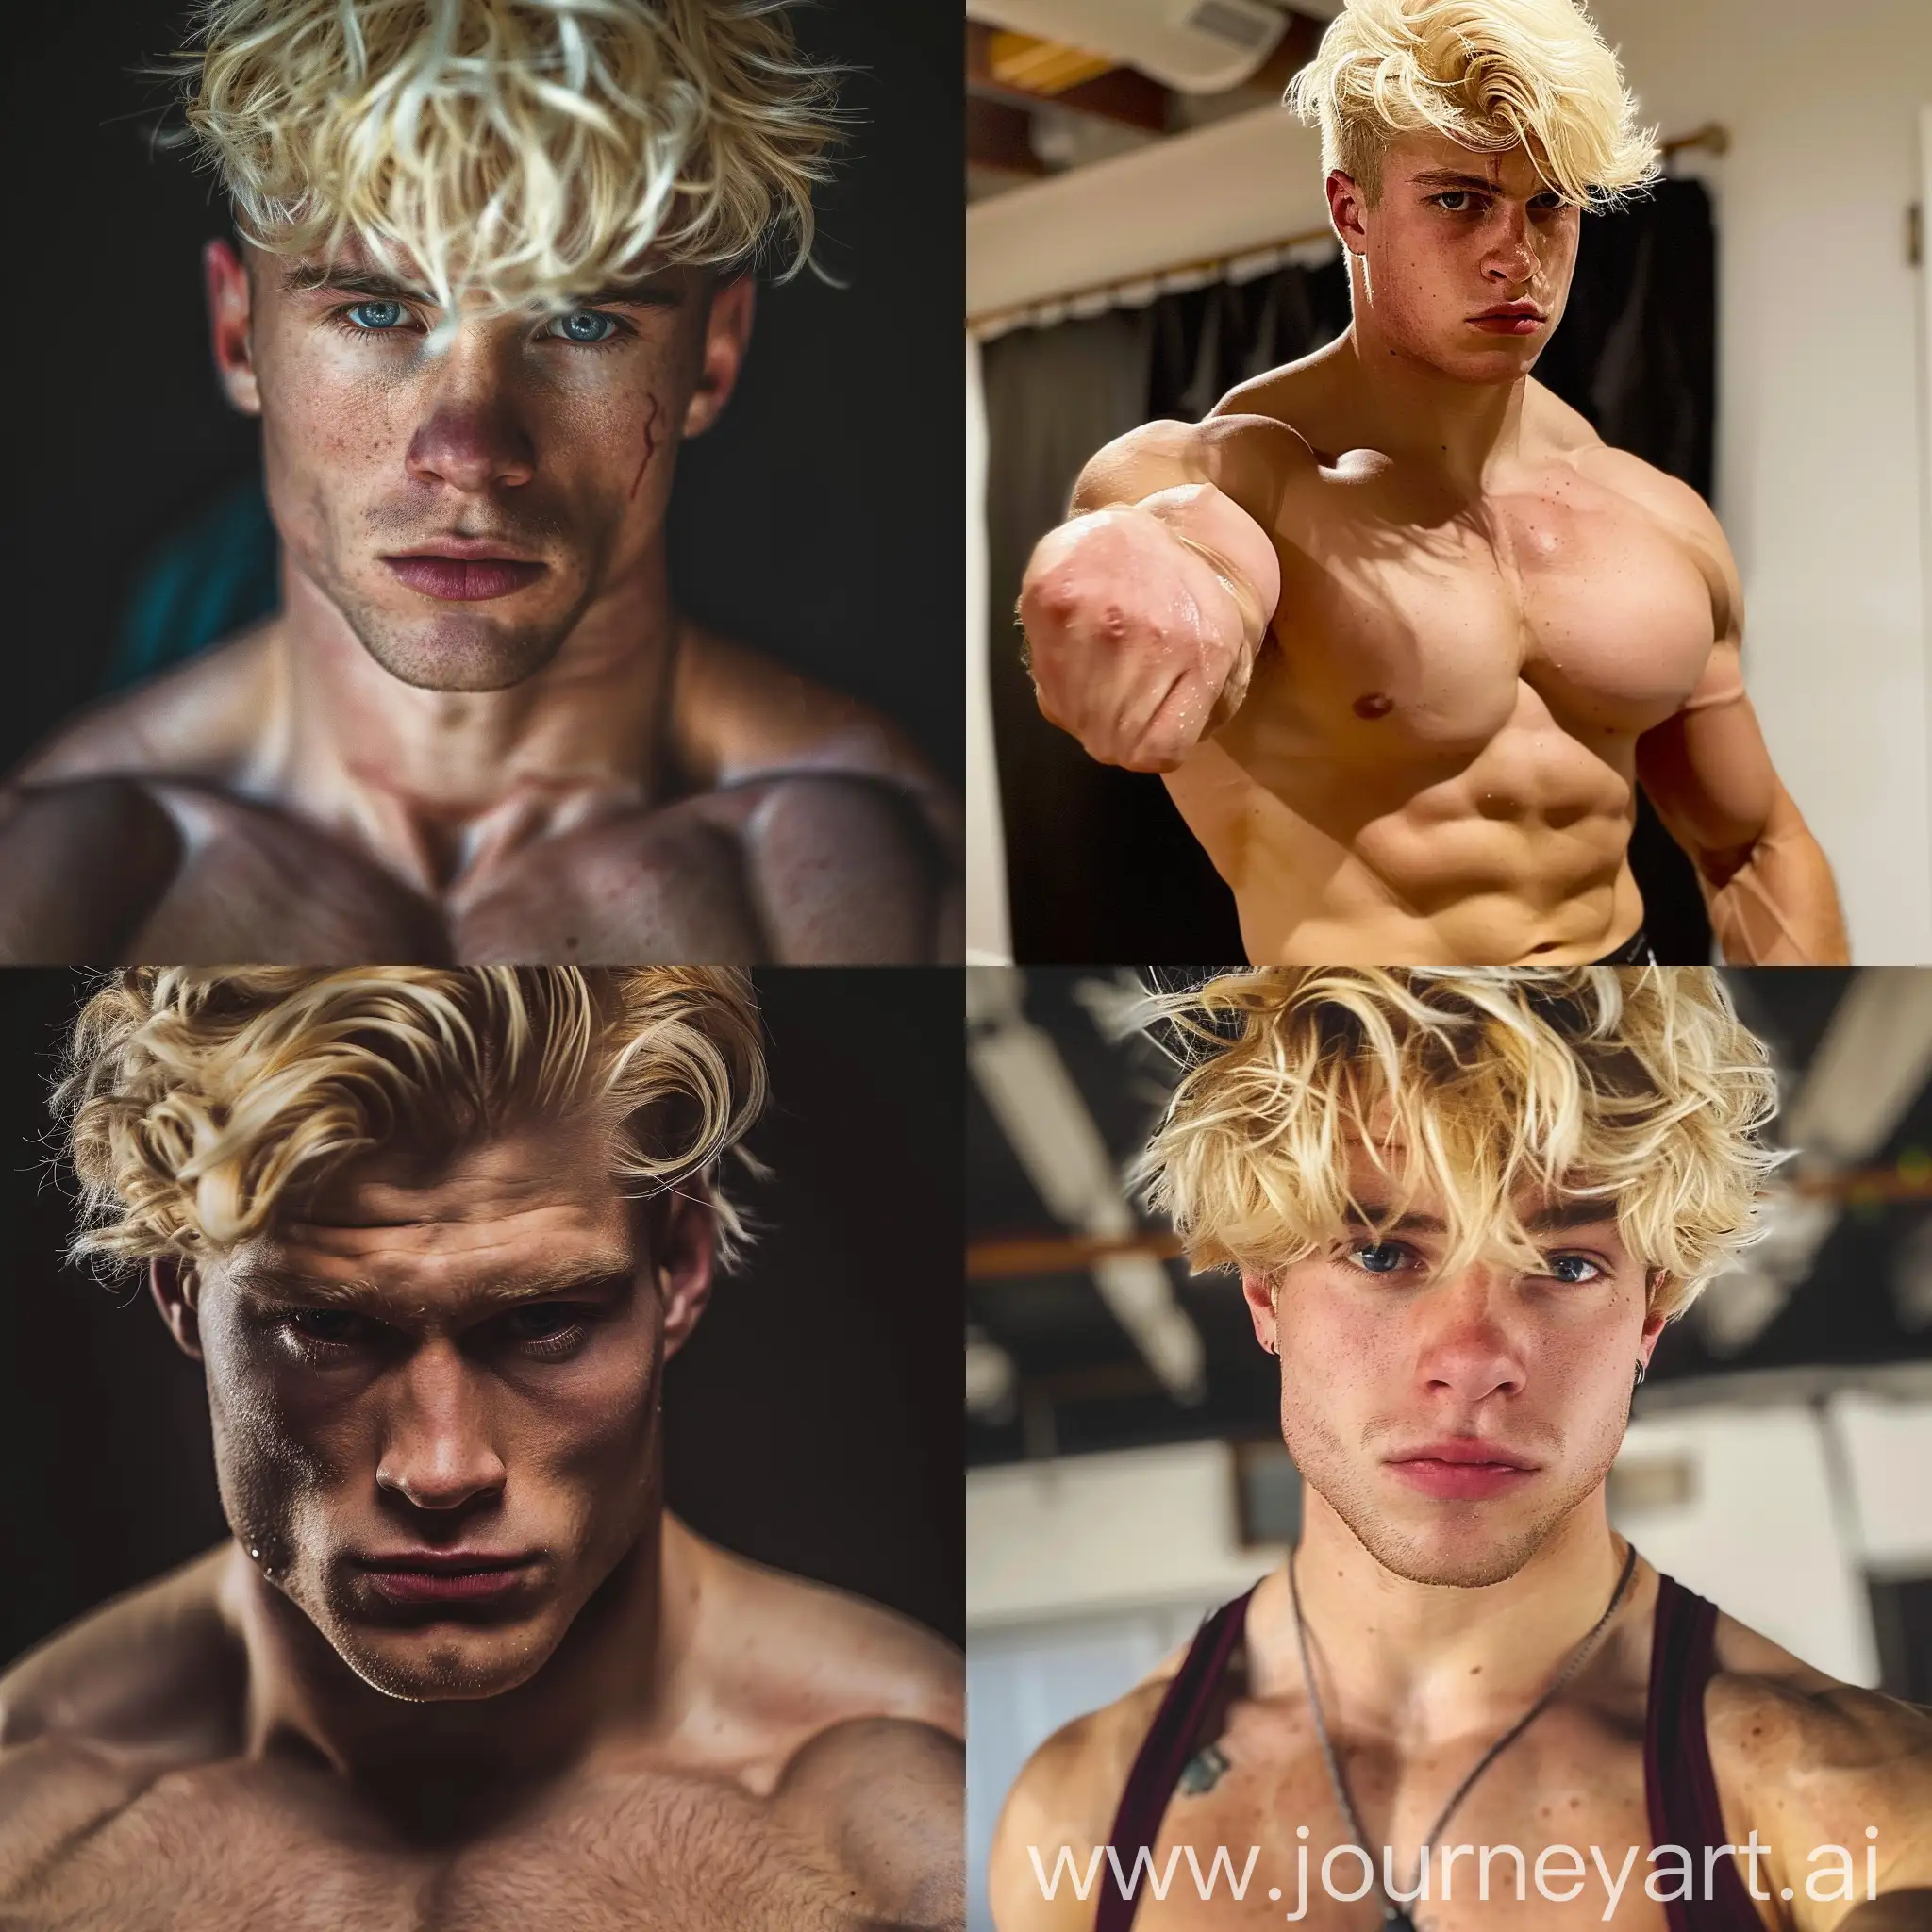 21 wrestler male. He is blond and dominant. 